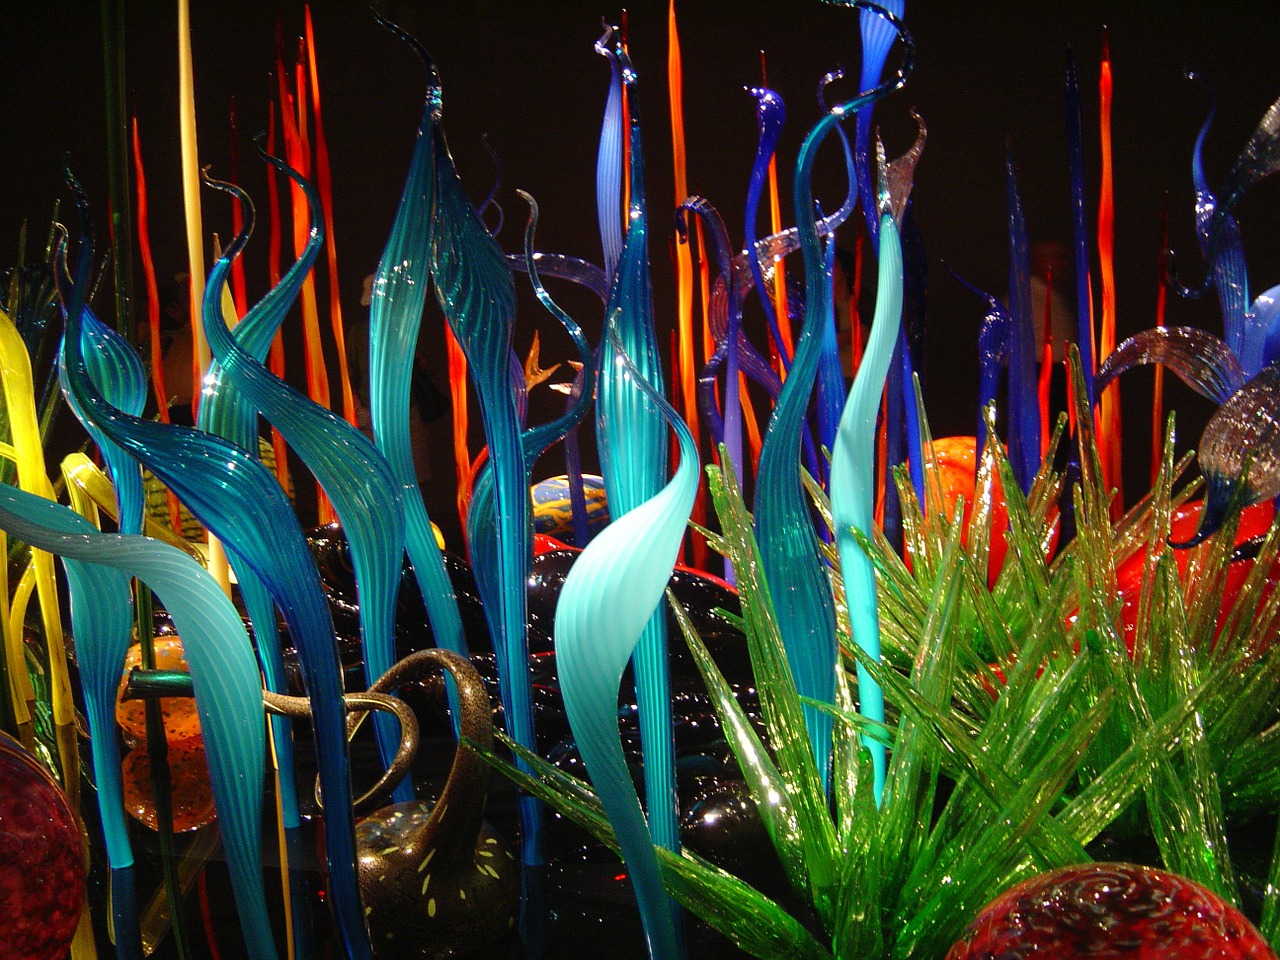 chihuly chihuly glass sculpture chihuly glass free photo